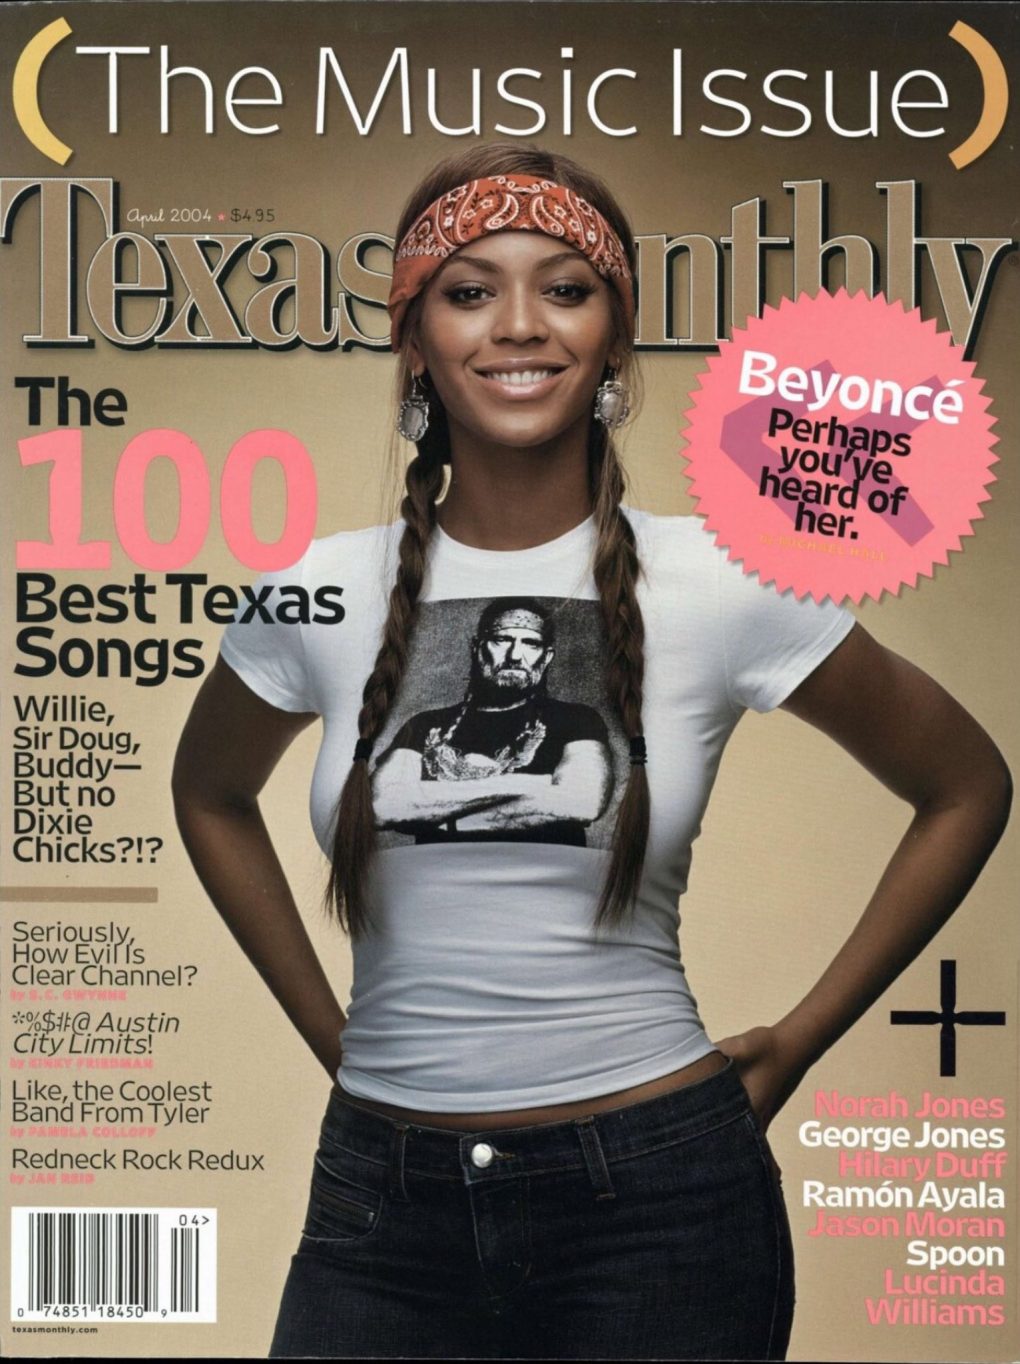 Beyonce of cover of Texas Monthly wearing a Willie Nelson t-shirt. From 2004.